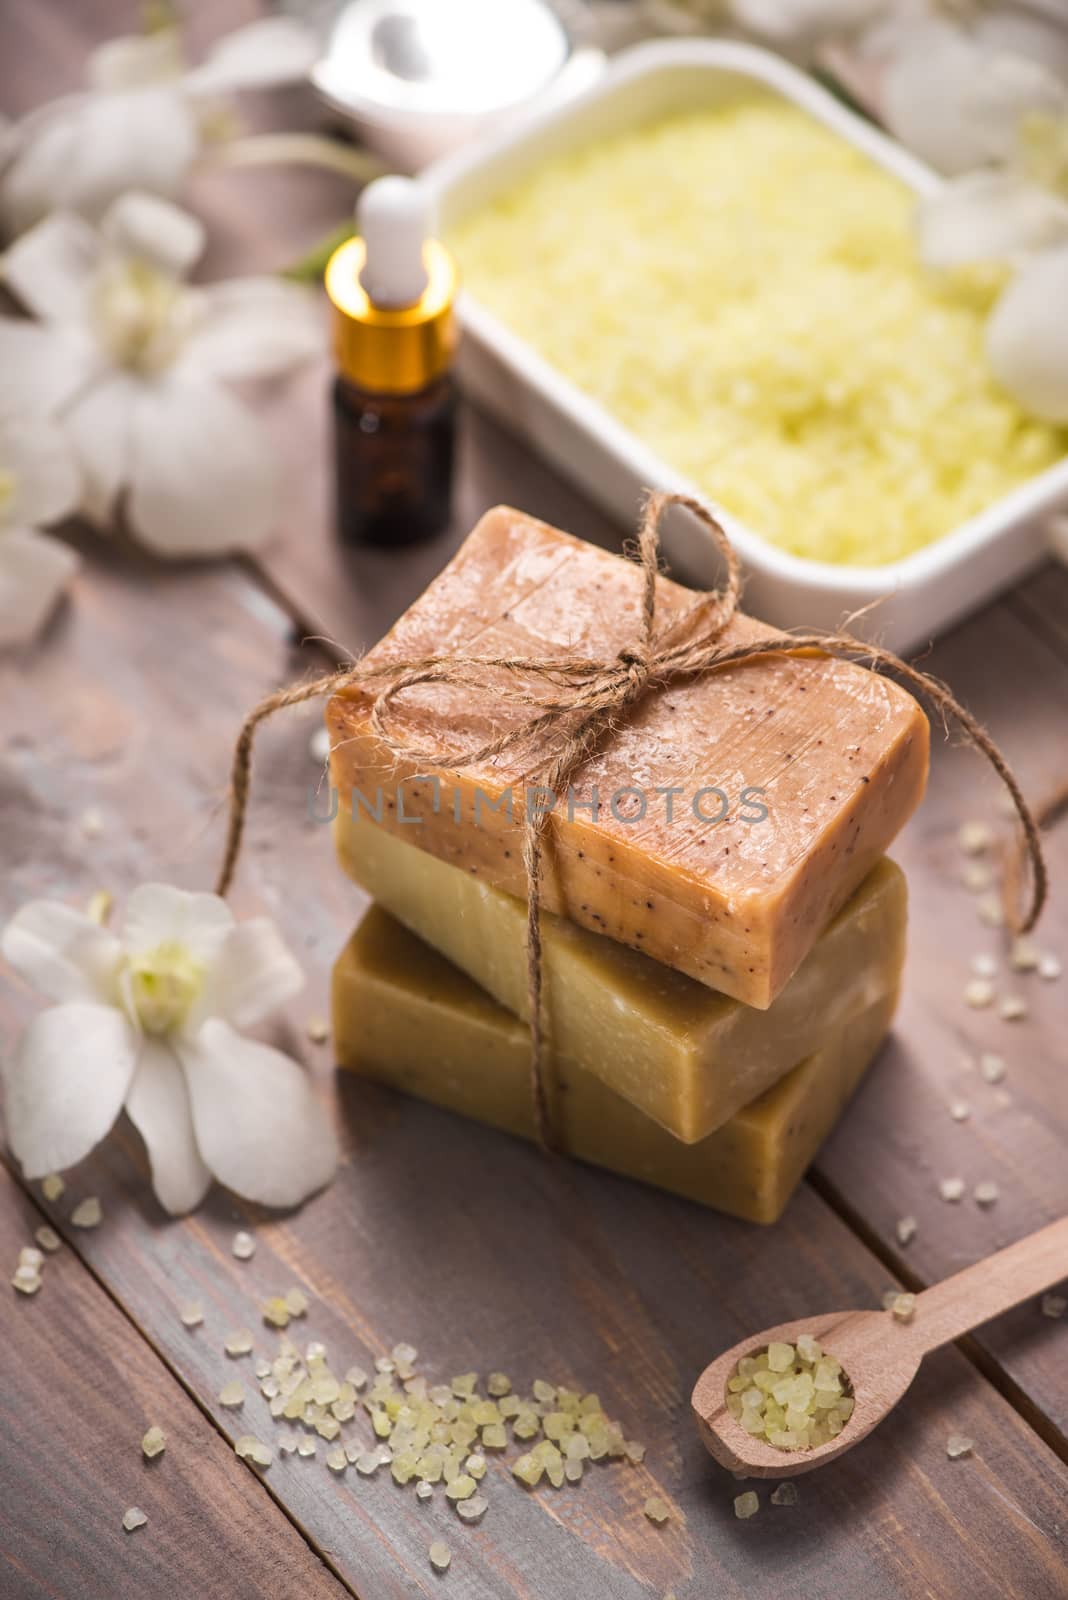 Handmade Soap and Aroma Oil with White orchid. Spa products.